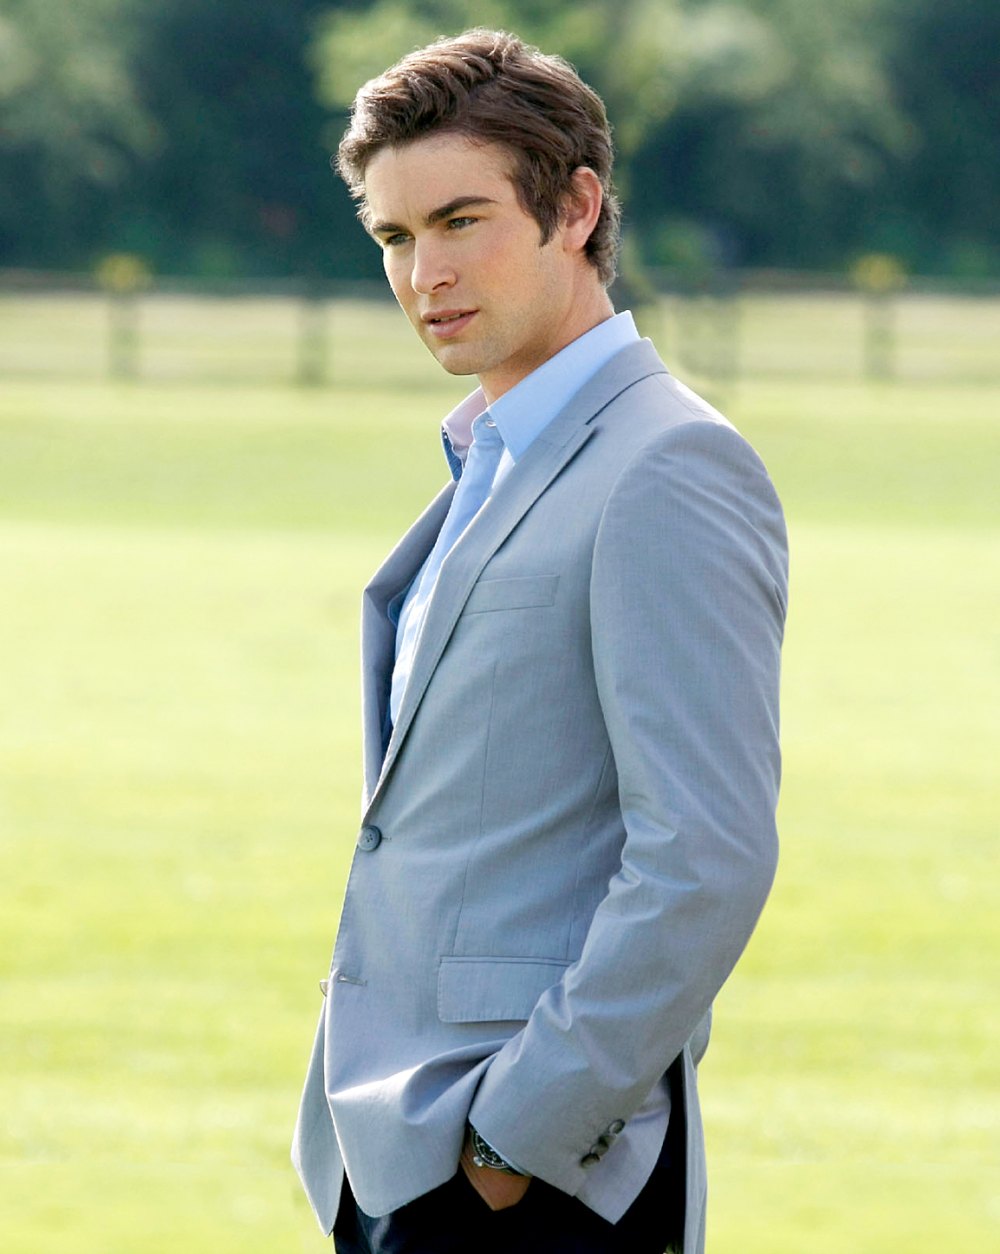 Chace Crawford on Trying to Break Out of ‘Gossip Girl’